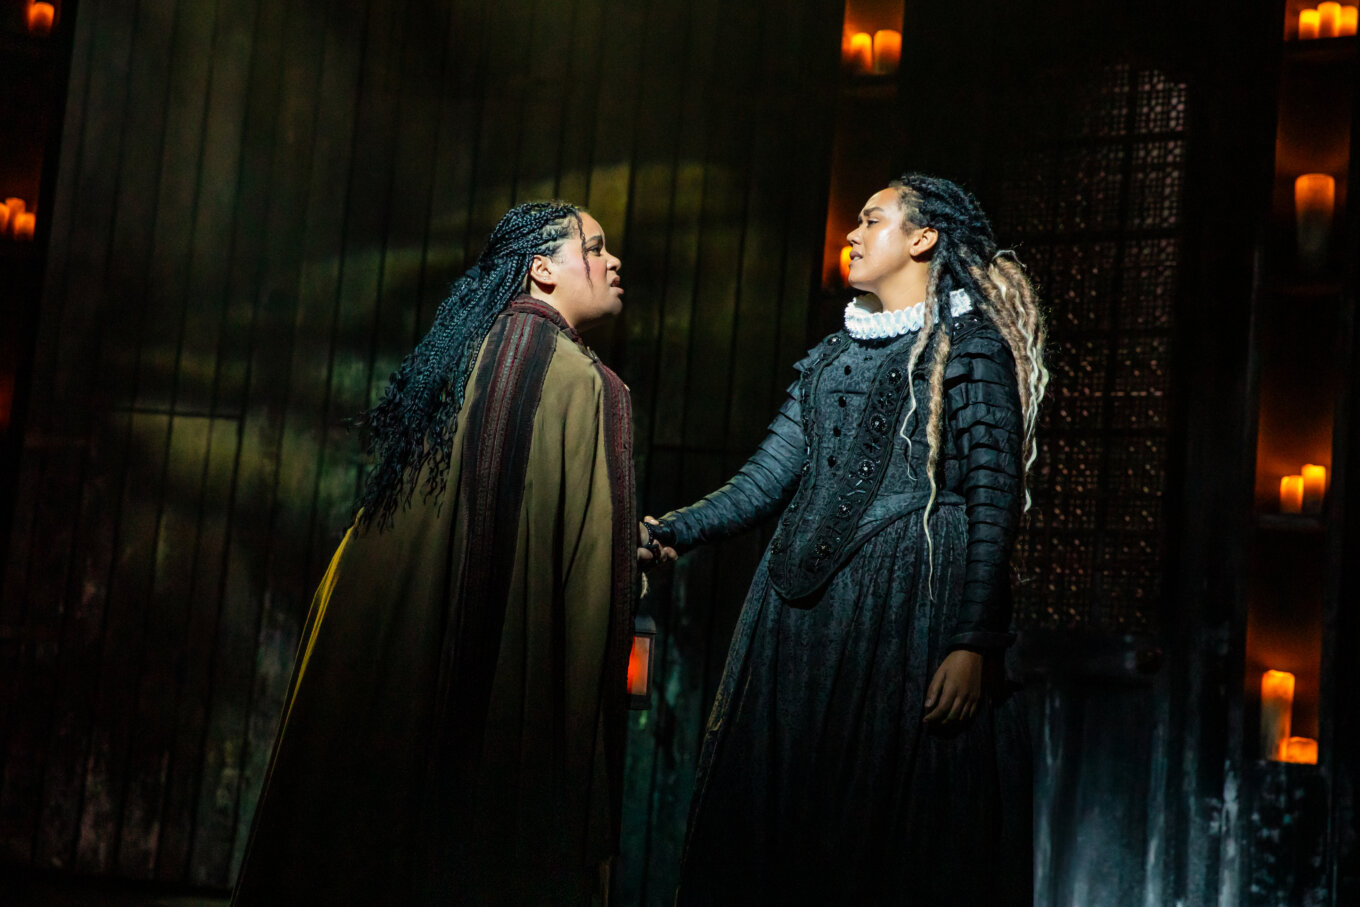 Two long-haired women, who look like they're in a confrontation, on a stage.